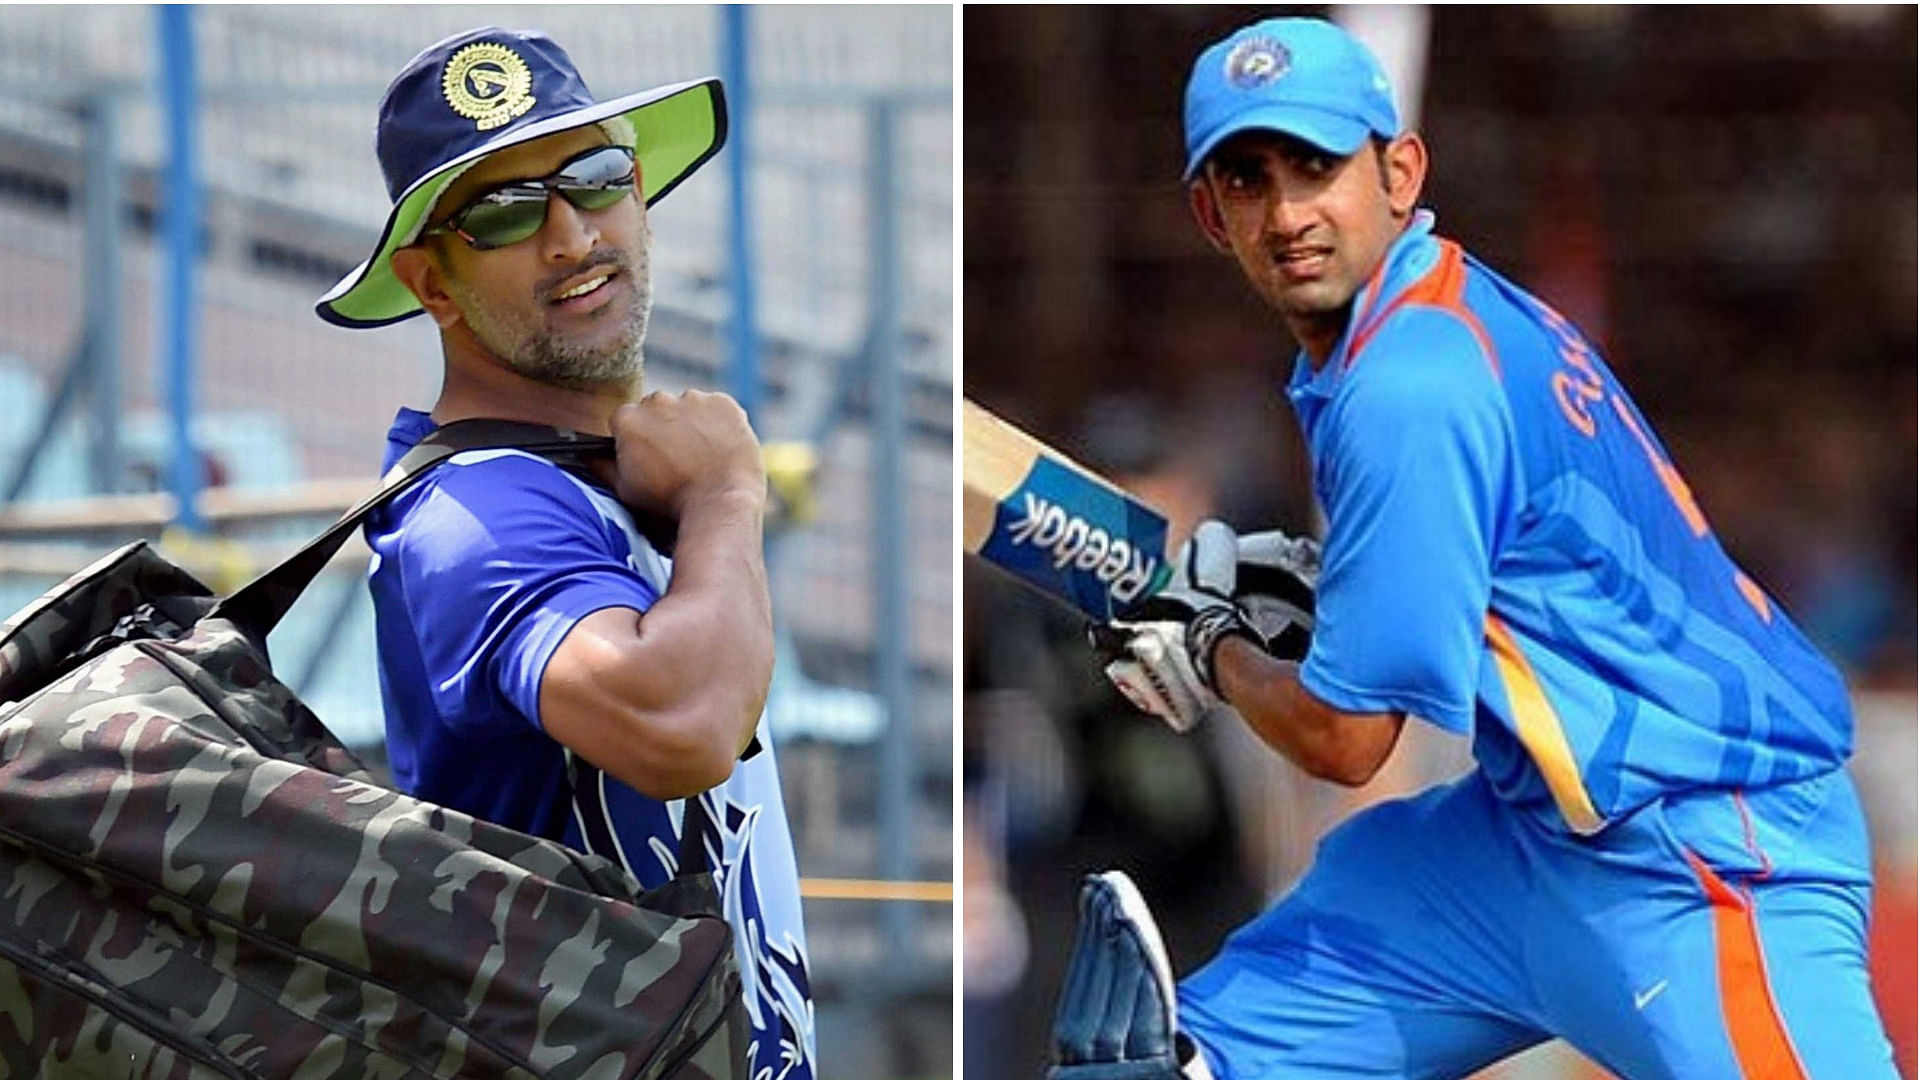 Reports have surfaced that BJP is likely to field Indian cricketers Mahendra Singh Dhoni and Gautam Gambhir for the upcoming Lok Sabha elections in 2019.